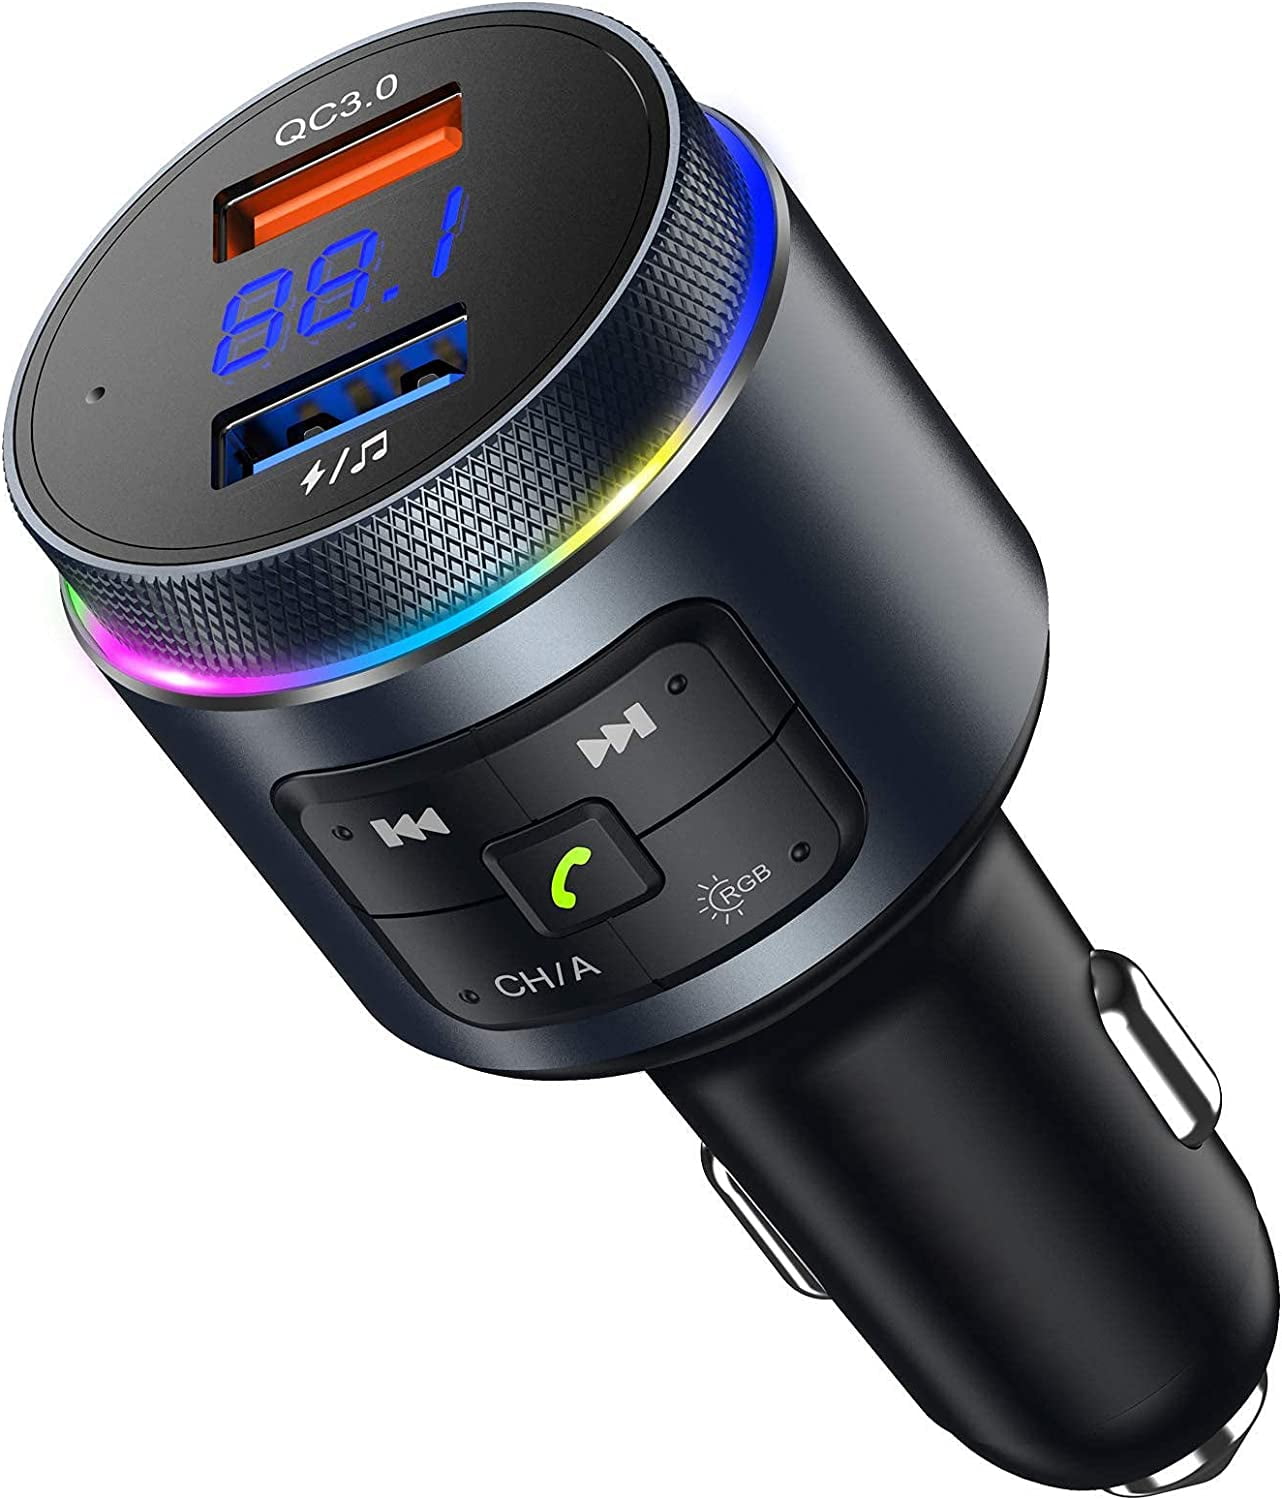 Cheap Car Bluetooth 5.0 FM Transmitter Wireless Handsfree Audio Receiver  Auto MP3 Player 2.1A Dual USB Fast Charger Car Accessories